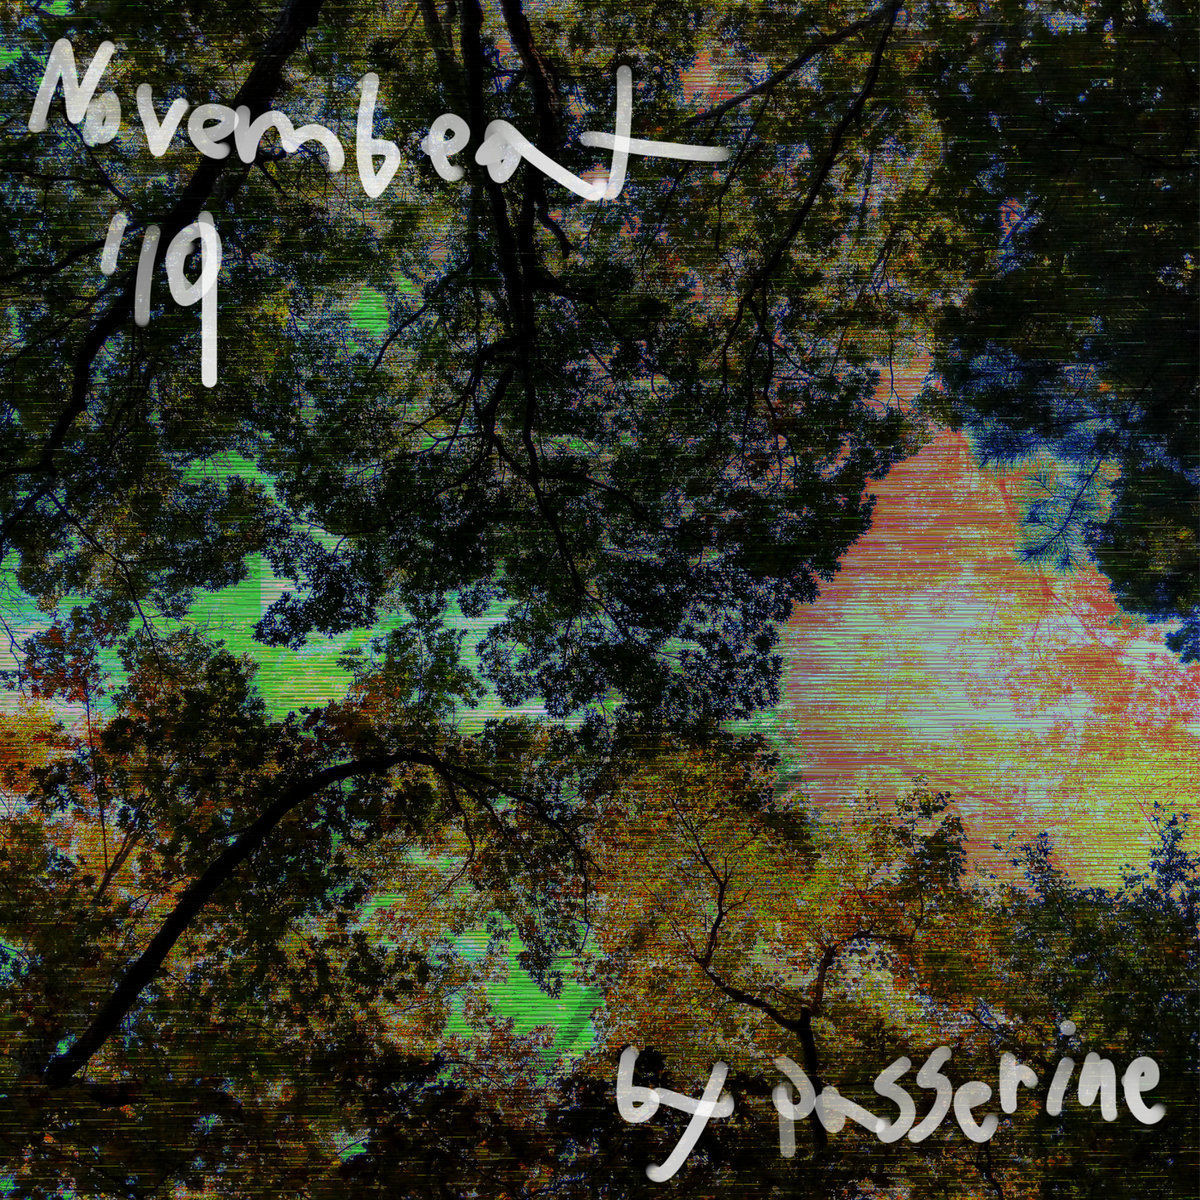 Glitch art with the camera pointing up at trees overhead. The text is drawn in white and says, "Novembeat '19 by passerine"